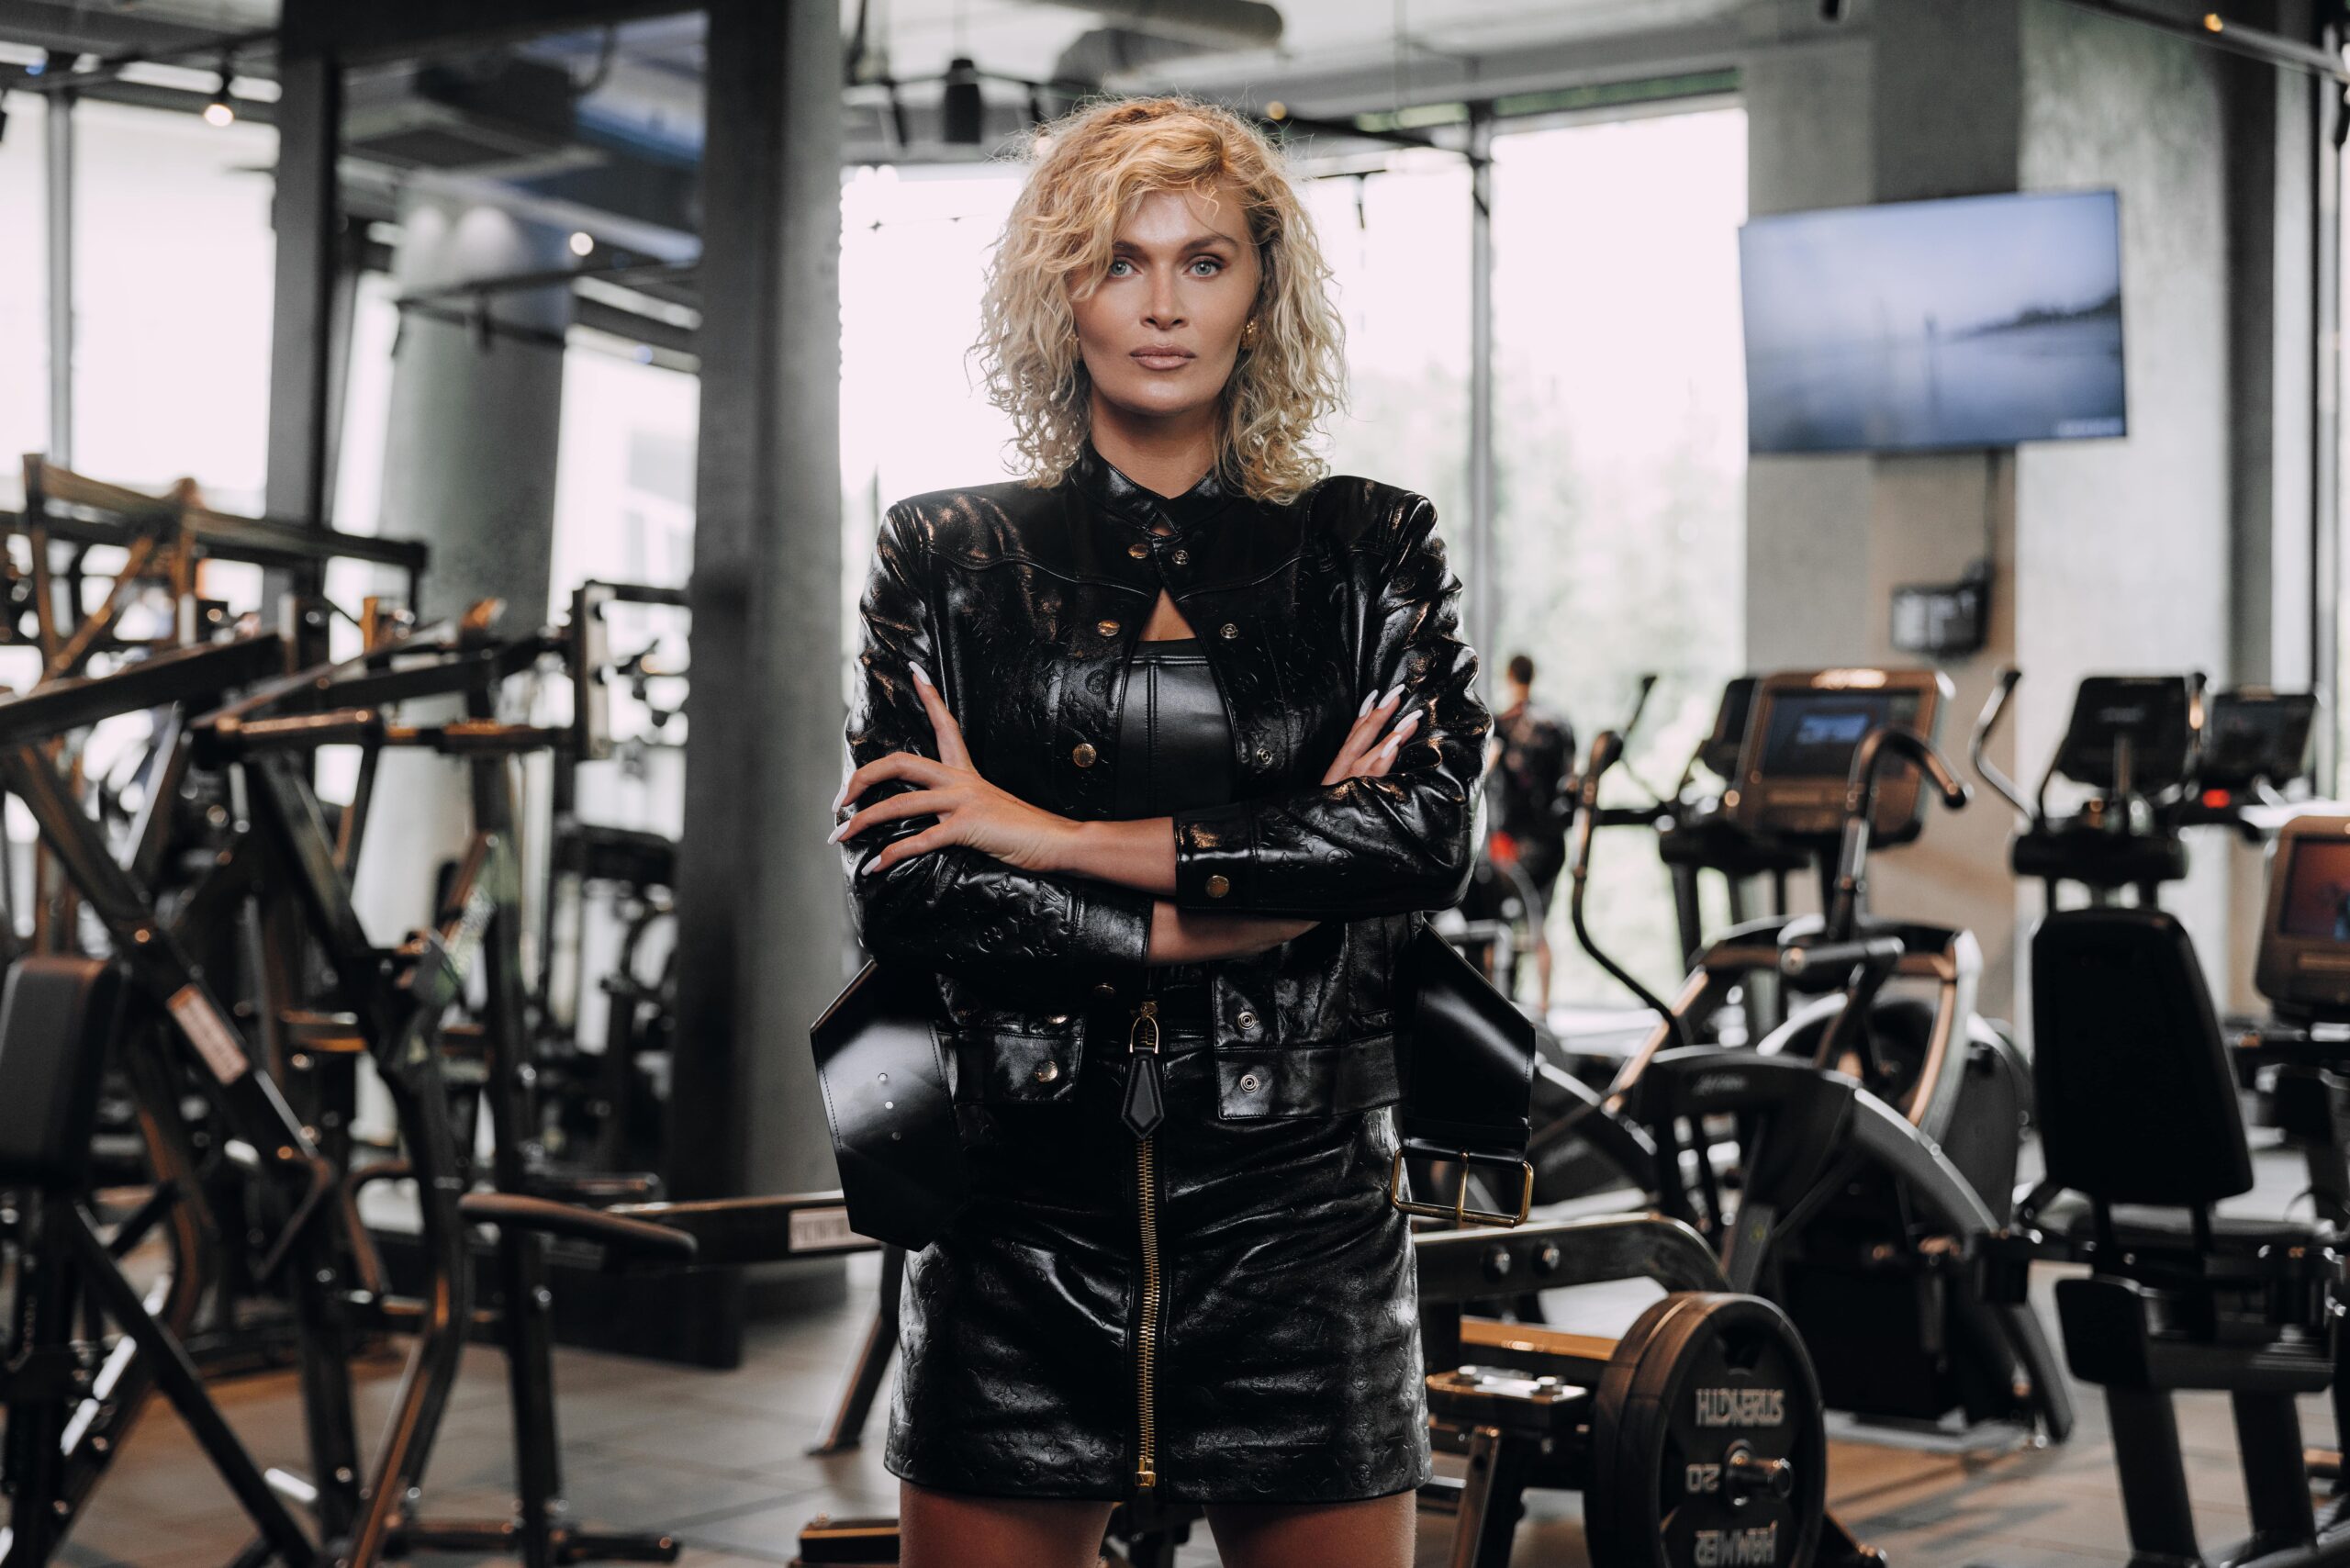 Nadezhda Grishaeva's Approach to Building Confidence and Combating Narcissism in Gyms